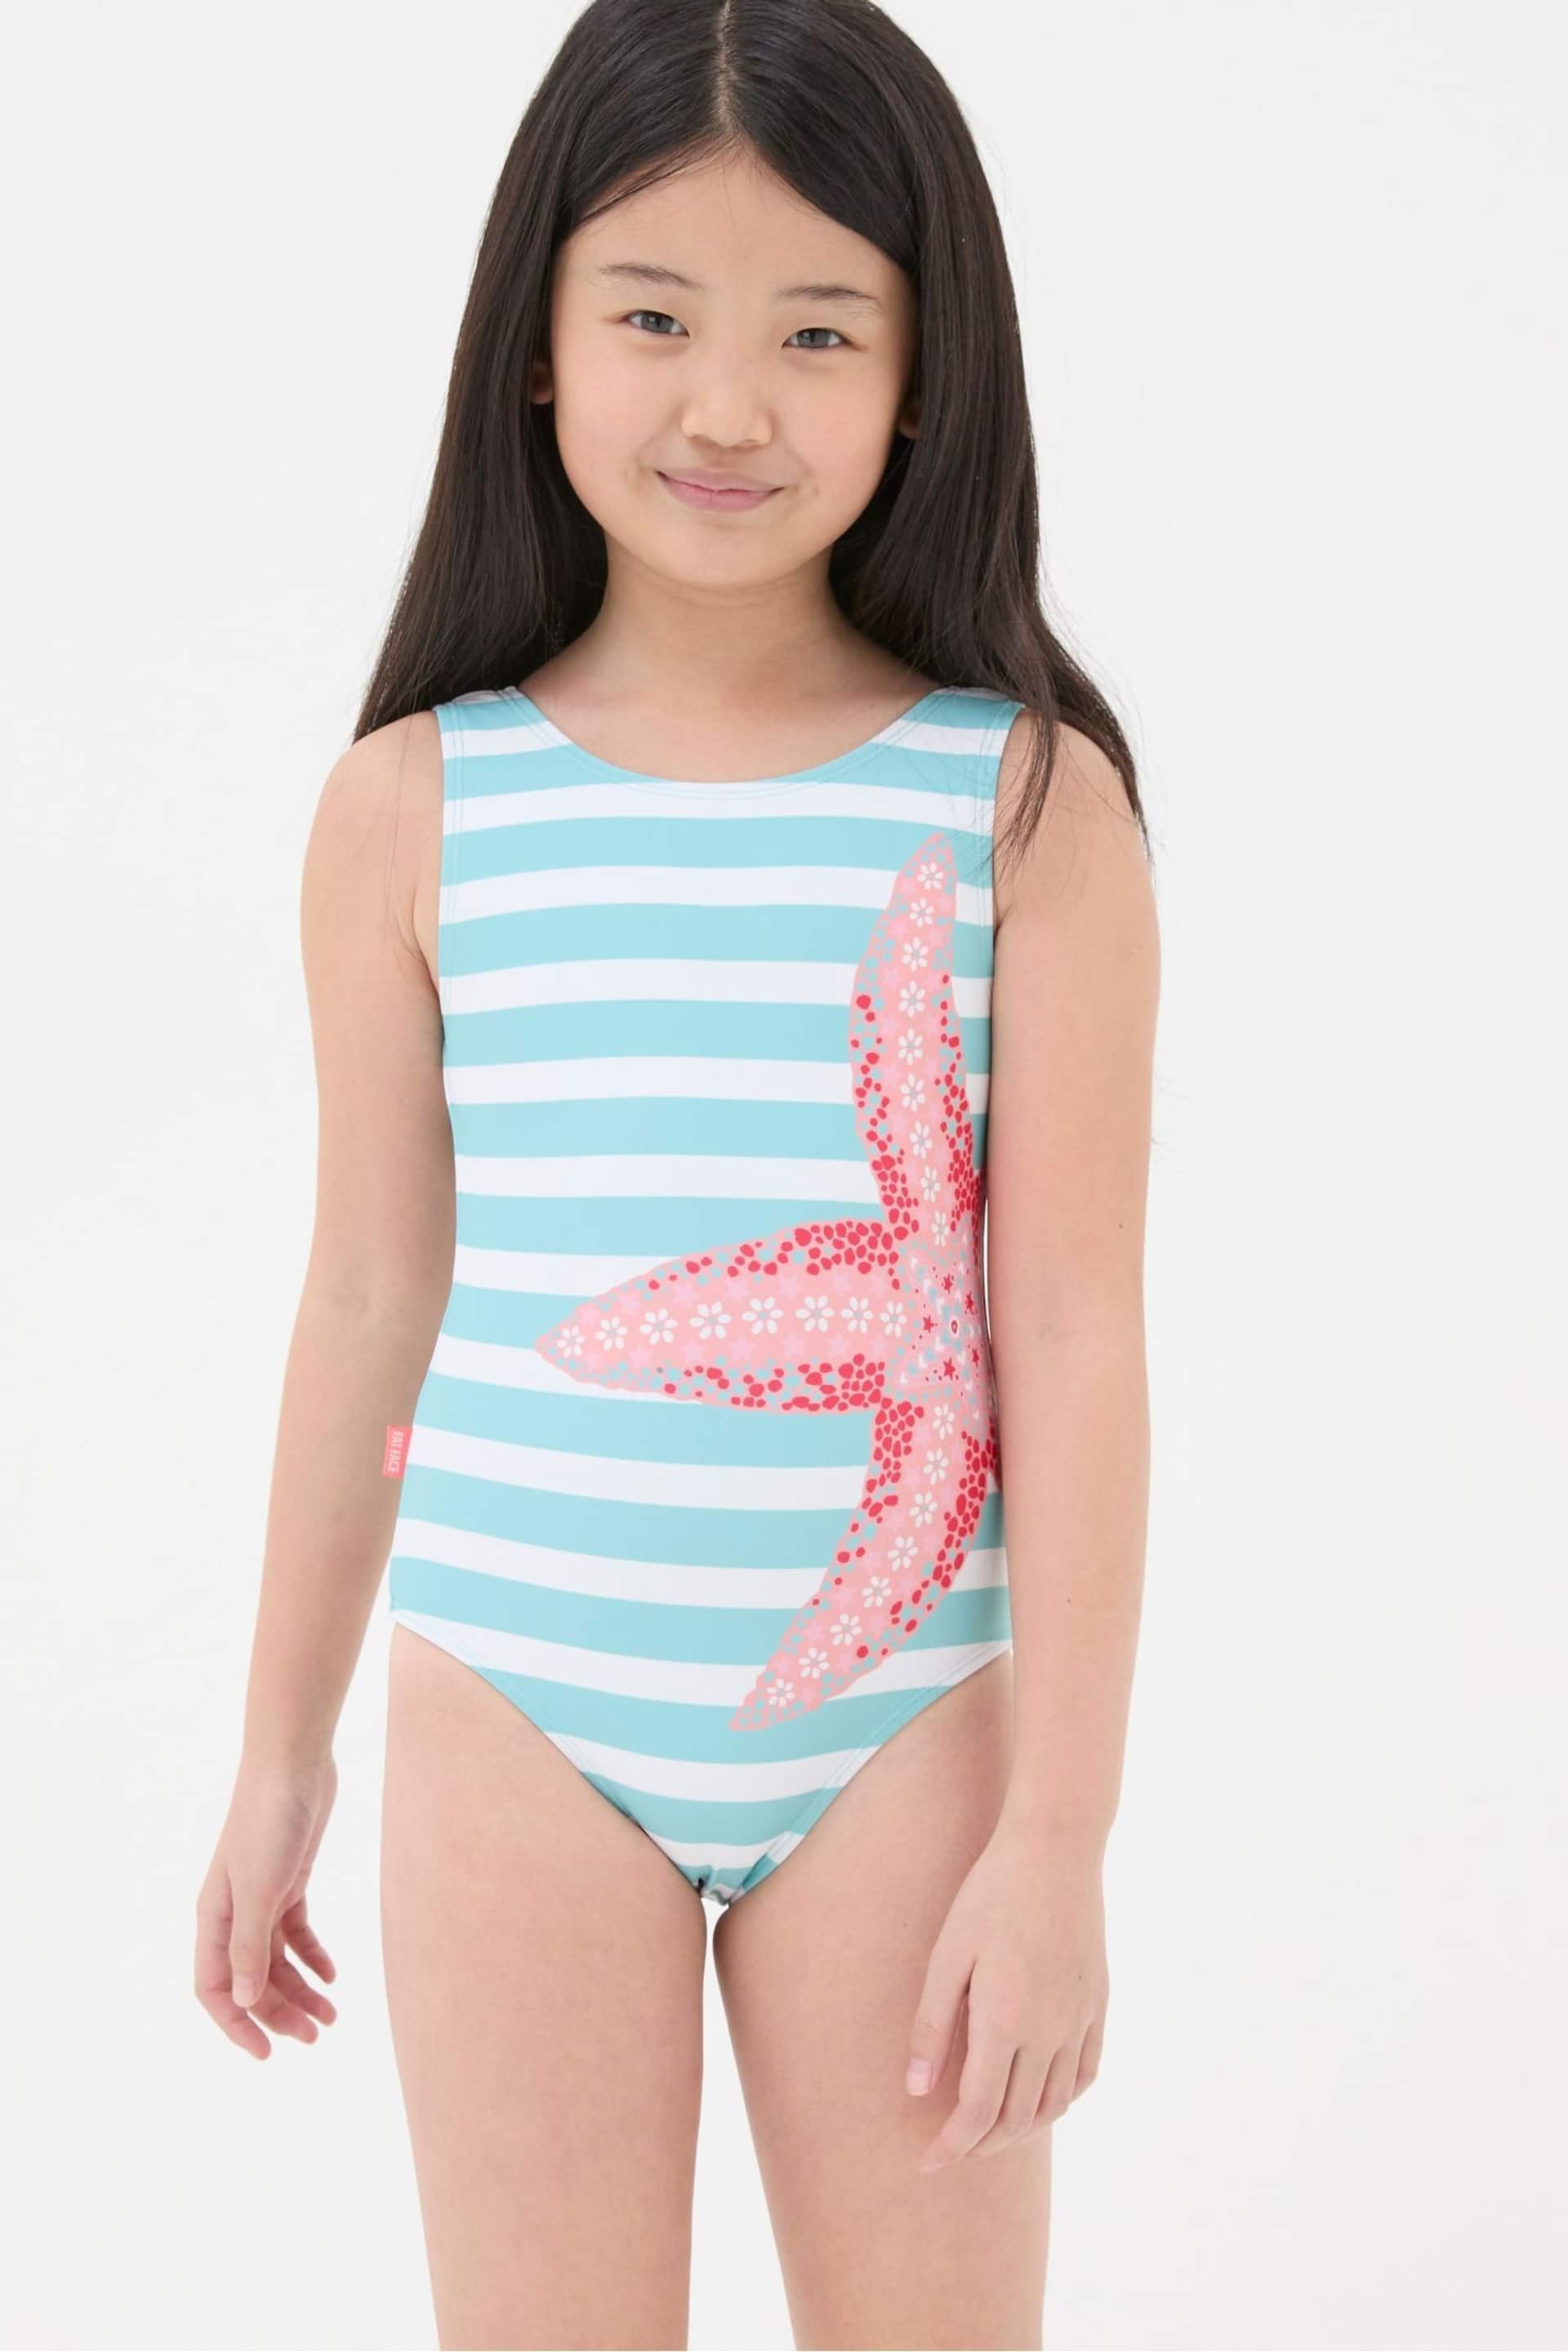 FatFace Blue Starfish Striped Swimsuit - Image 1 of 4